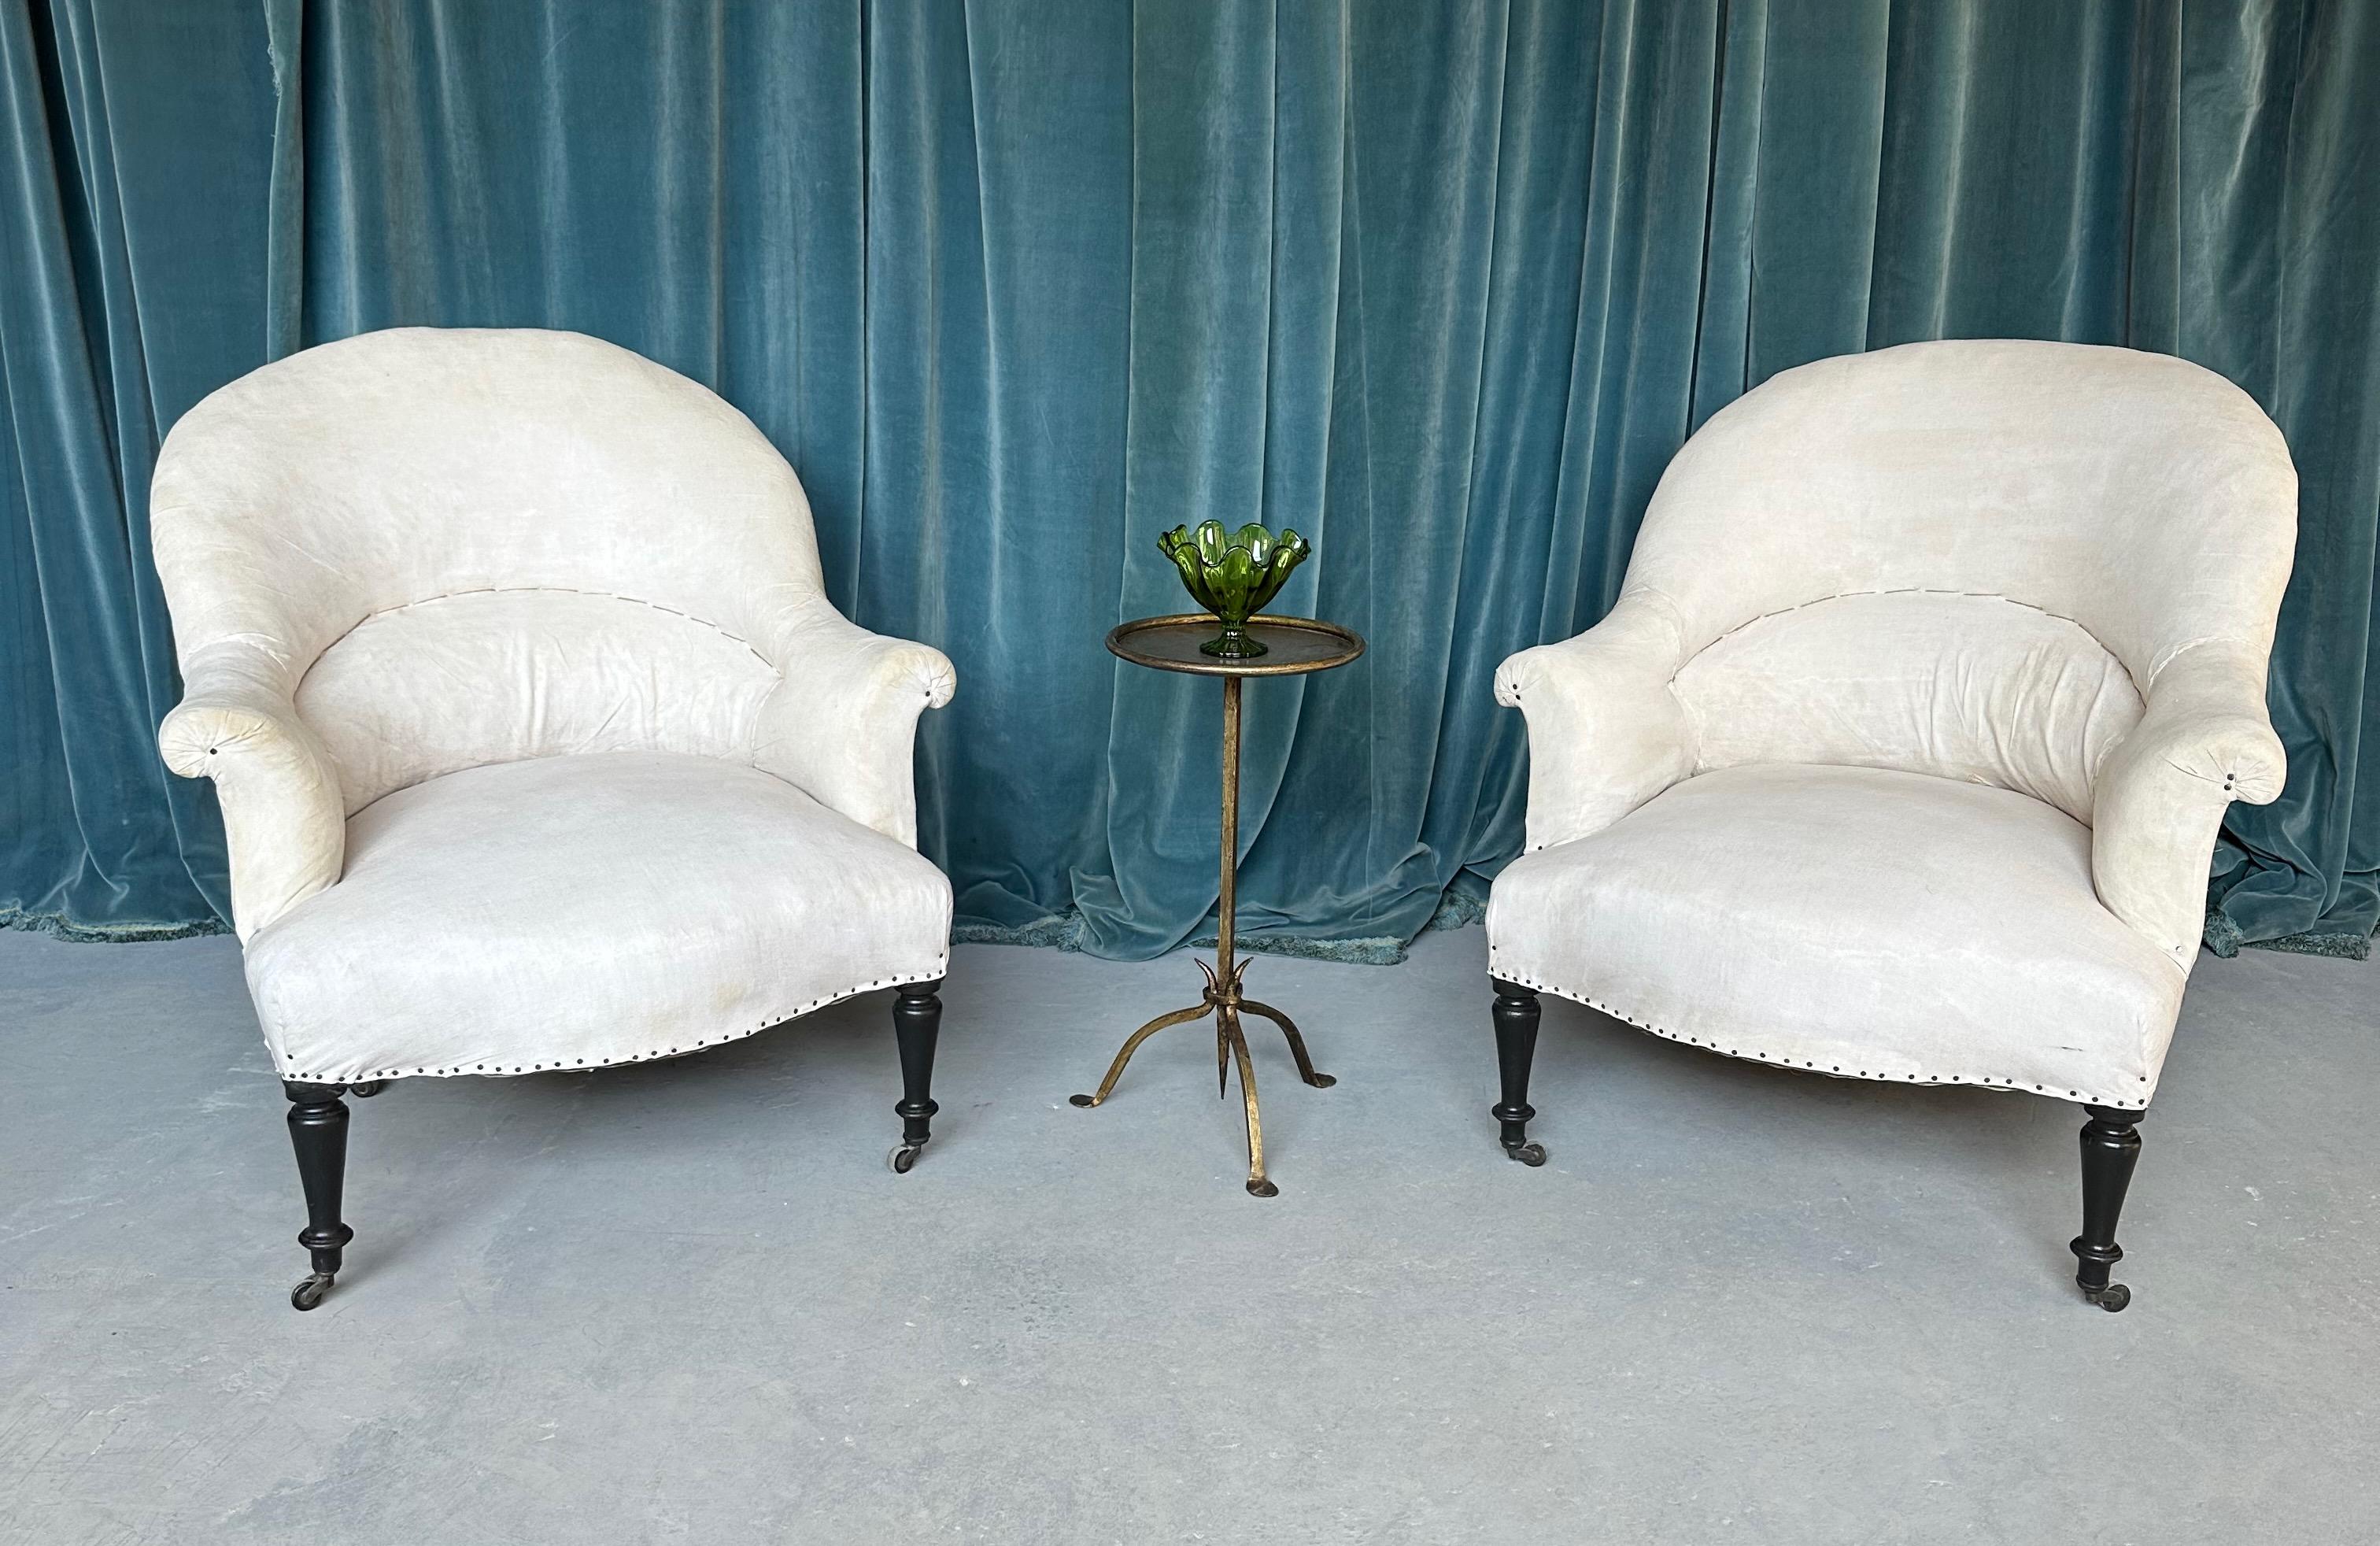 A classic pair of French 19th century Napoleon III style armchairs with gracious rounded backs and gently flared arms. These chairs are designed with impeccable proportions, featuring a generously curved back that offers outstanding lumbar support